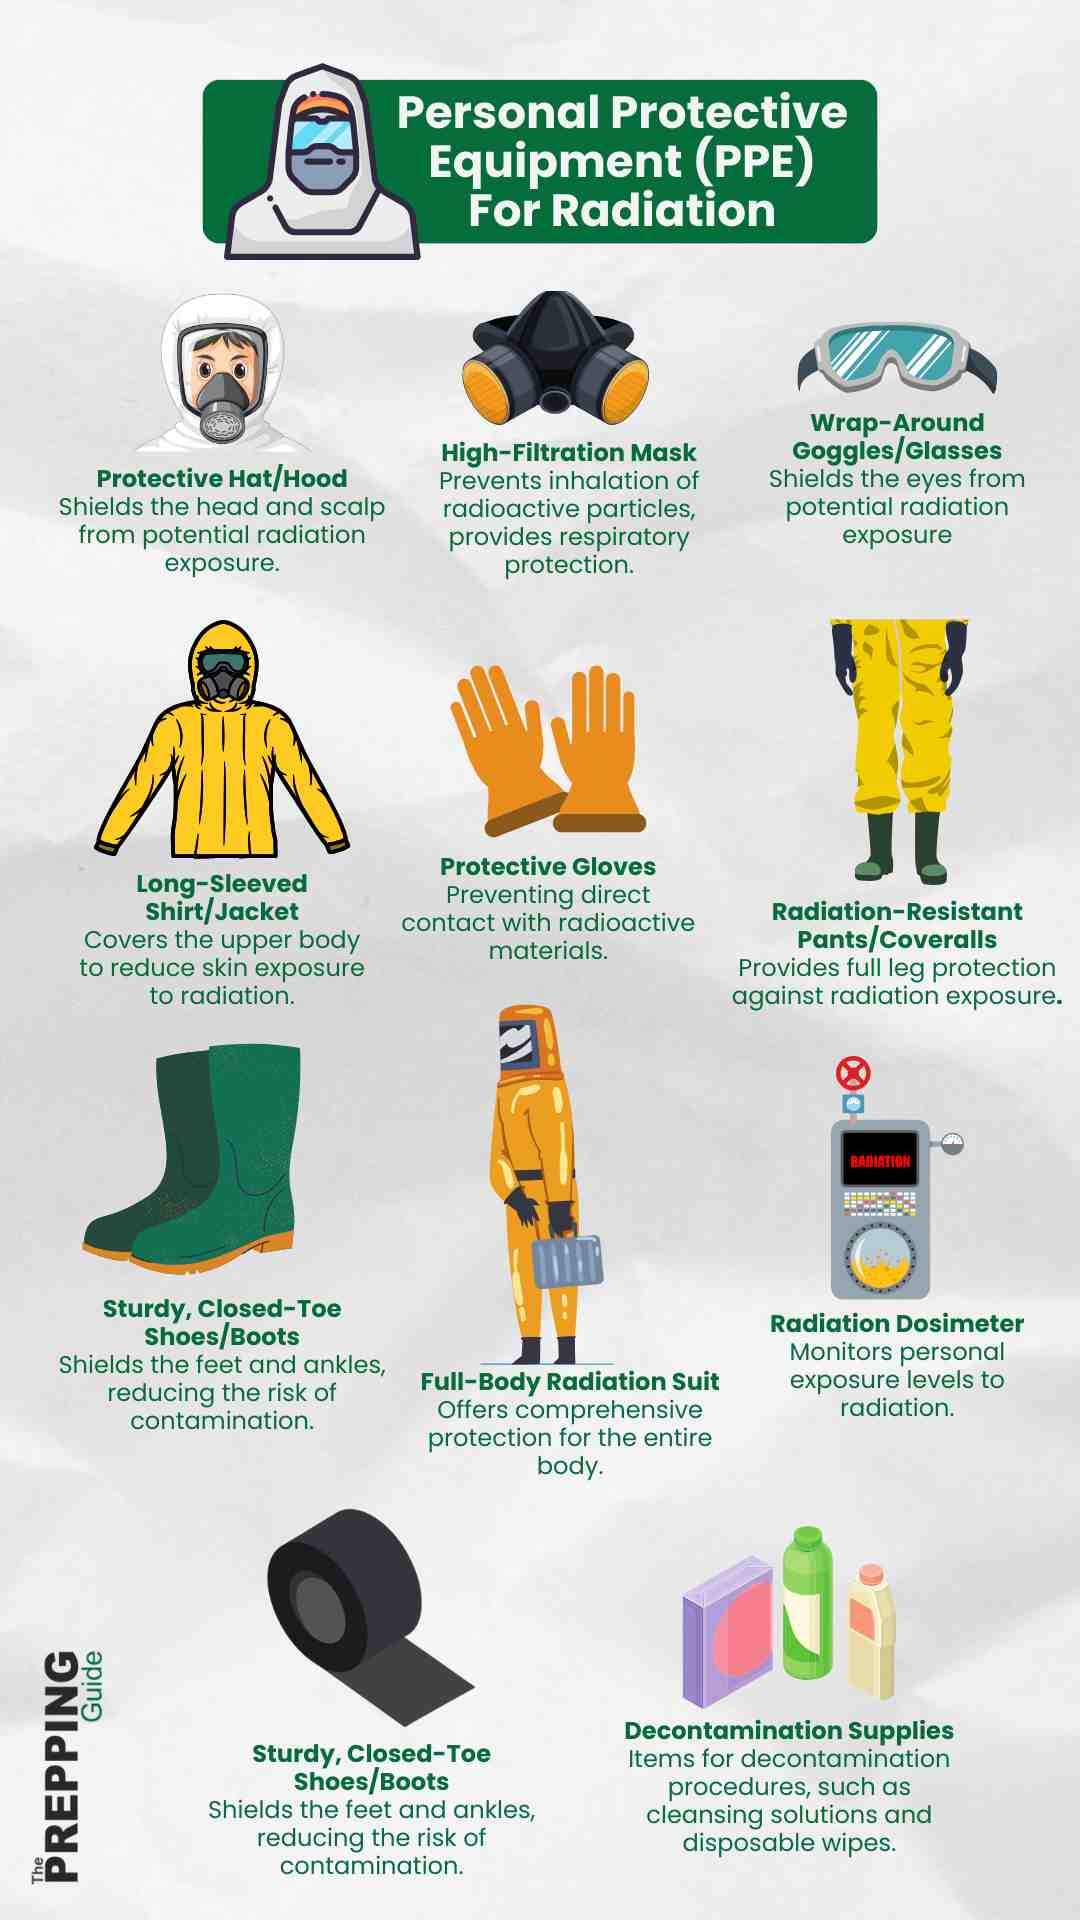 Different types of personal protective equipment for radiation.